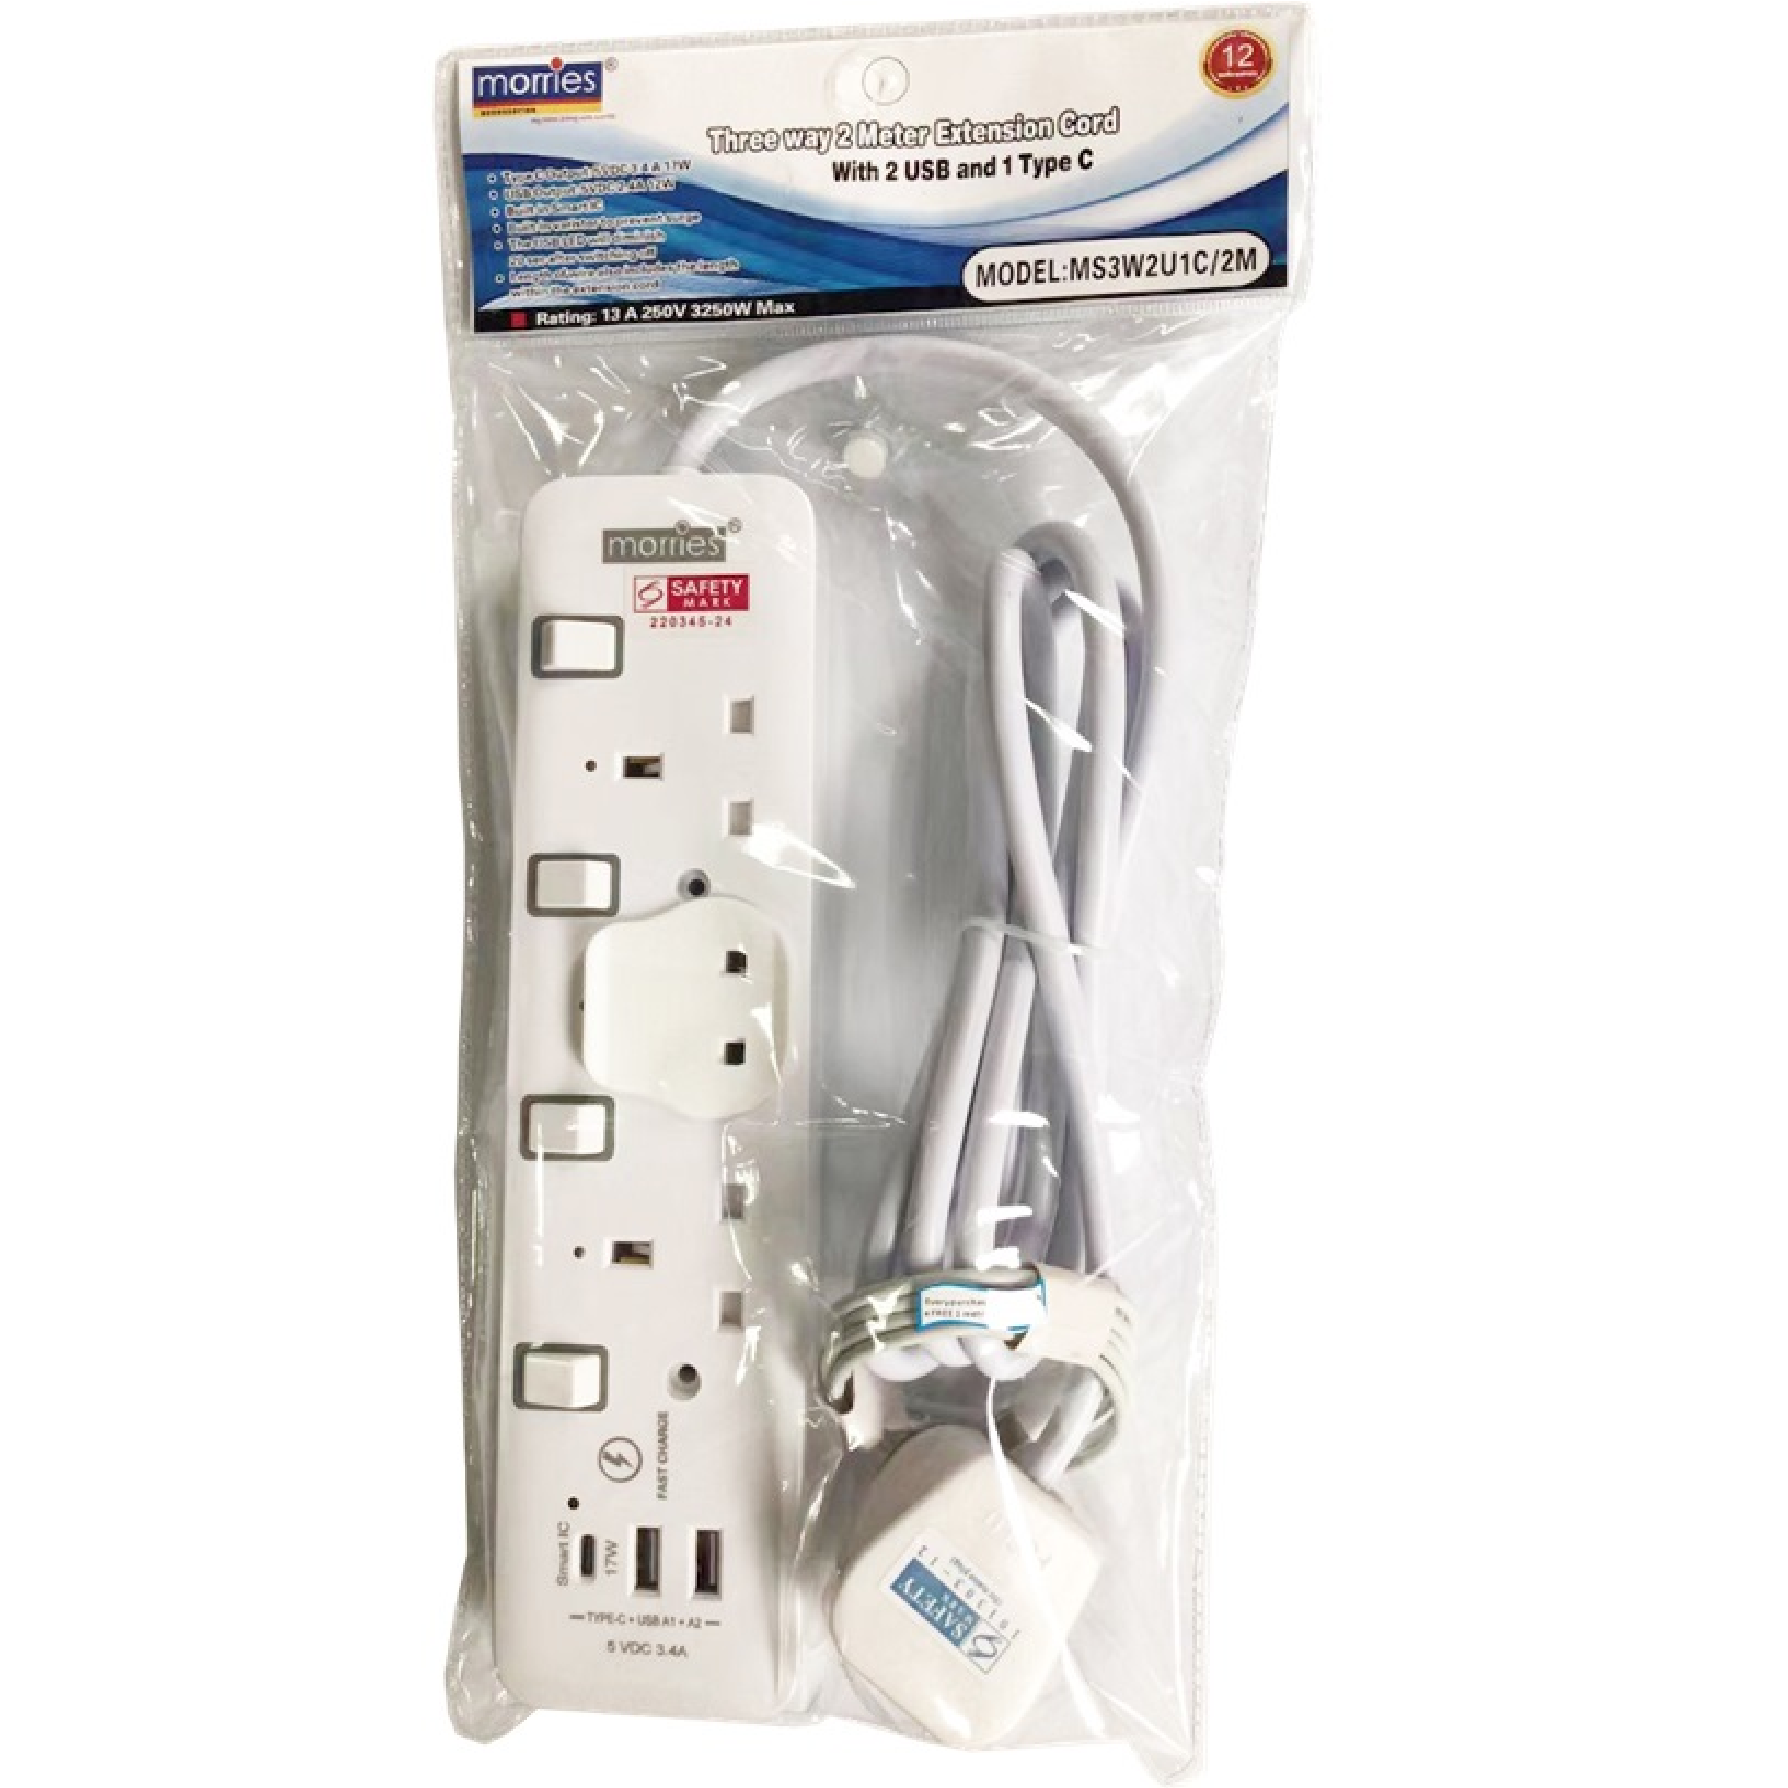 Morries 3 Way 2M Extension Cord With 2 USB & 1 TYPE C MS3W2U1C/2M